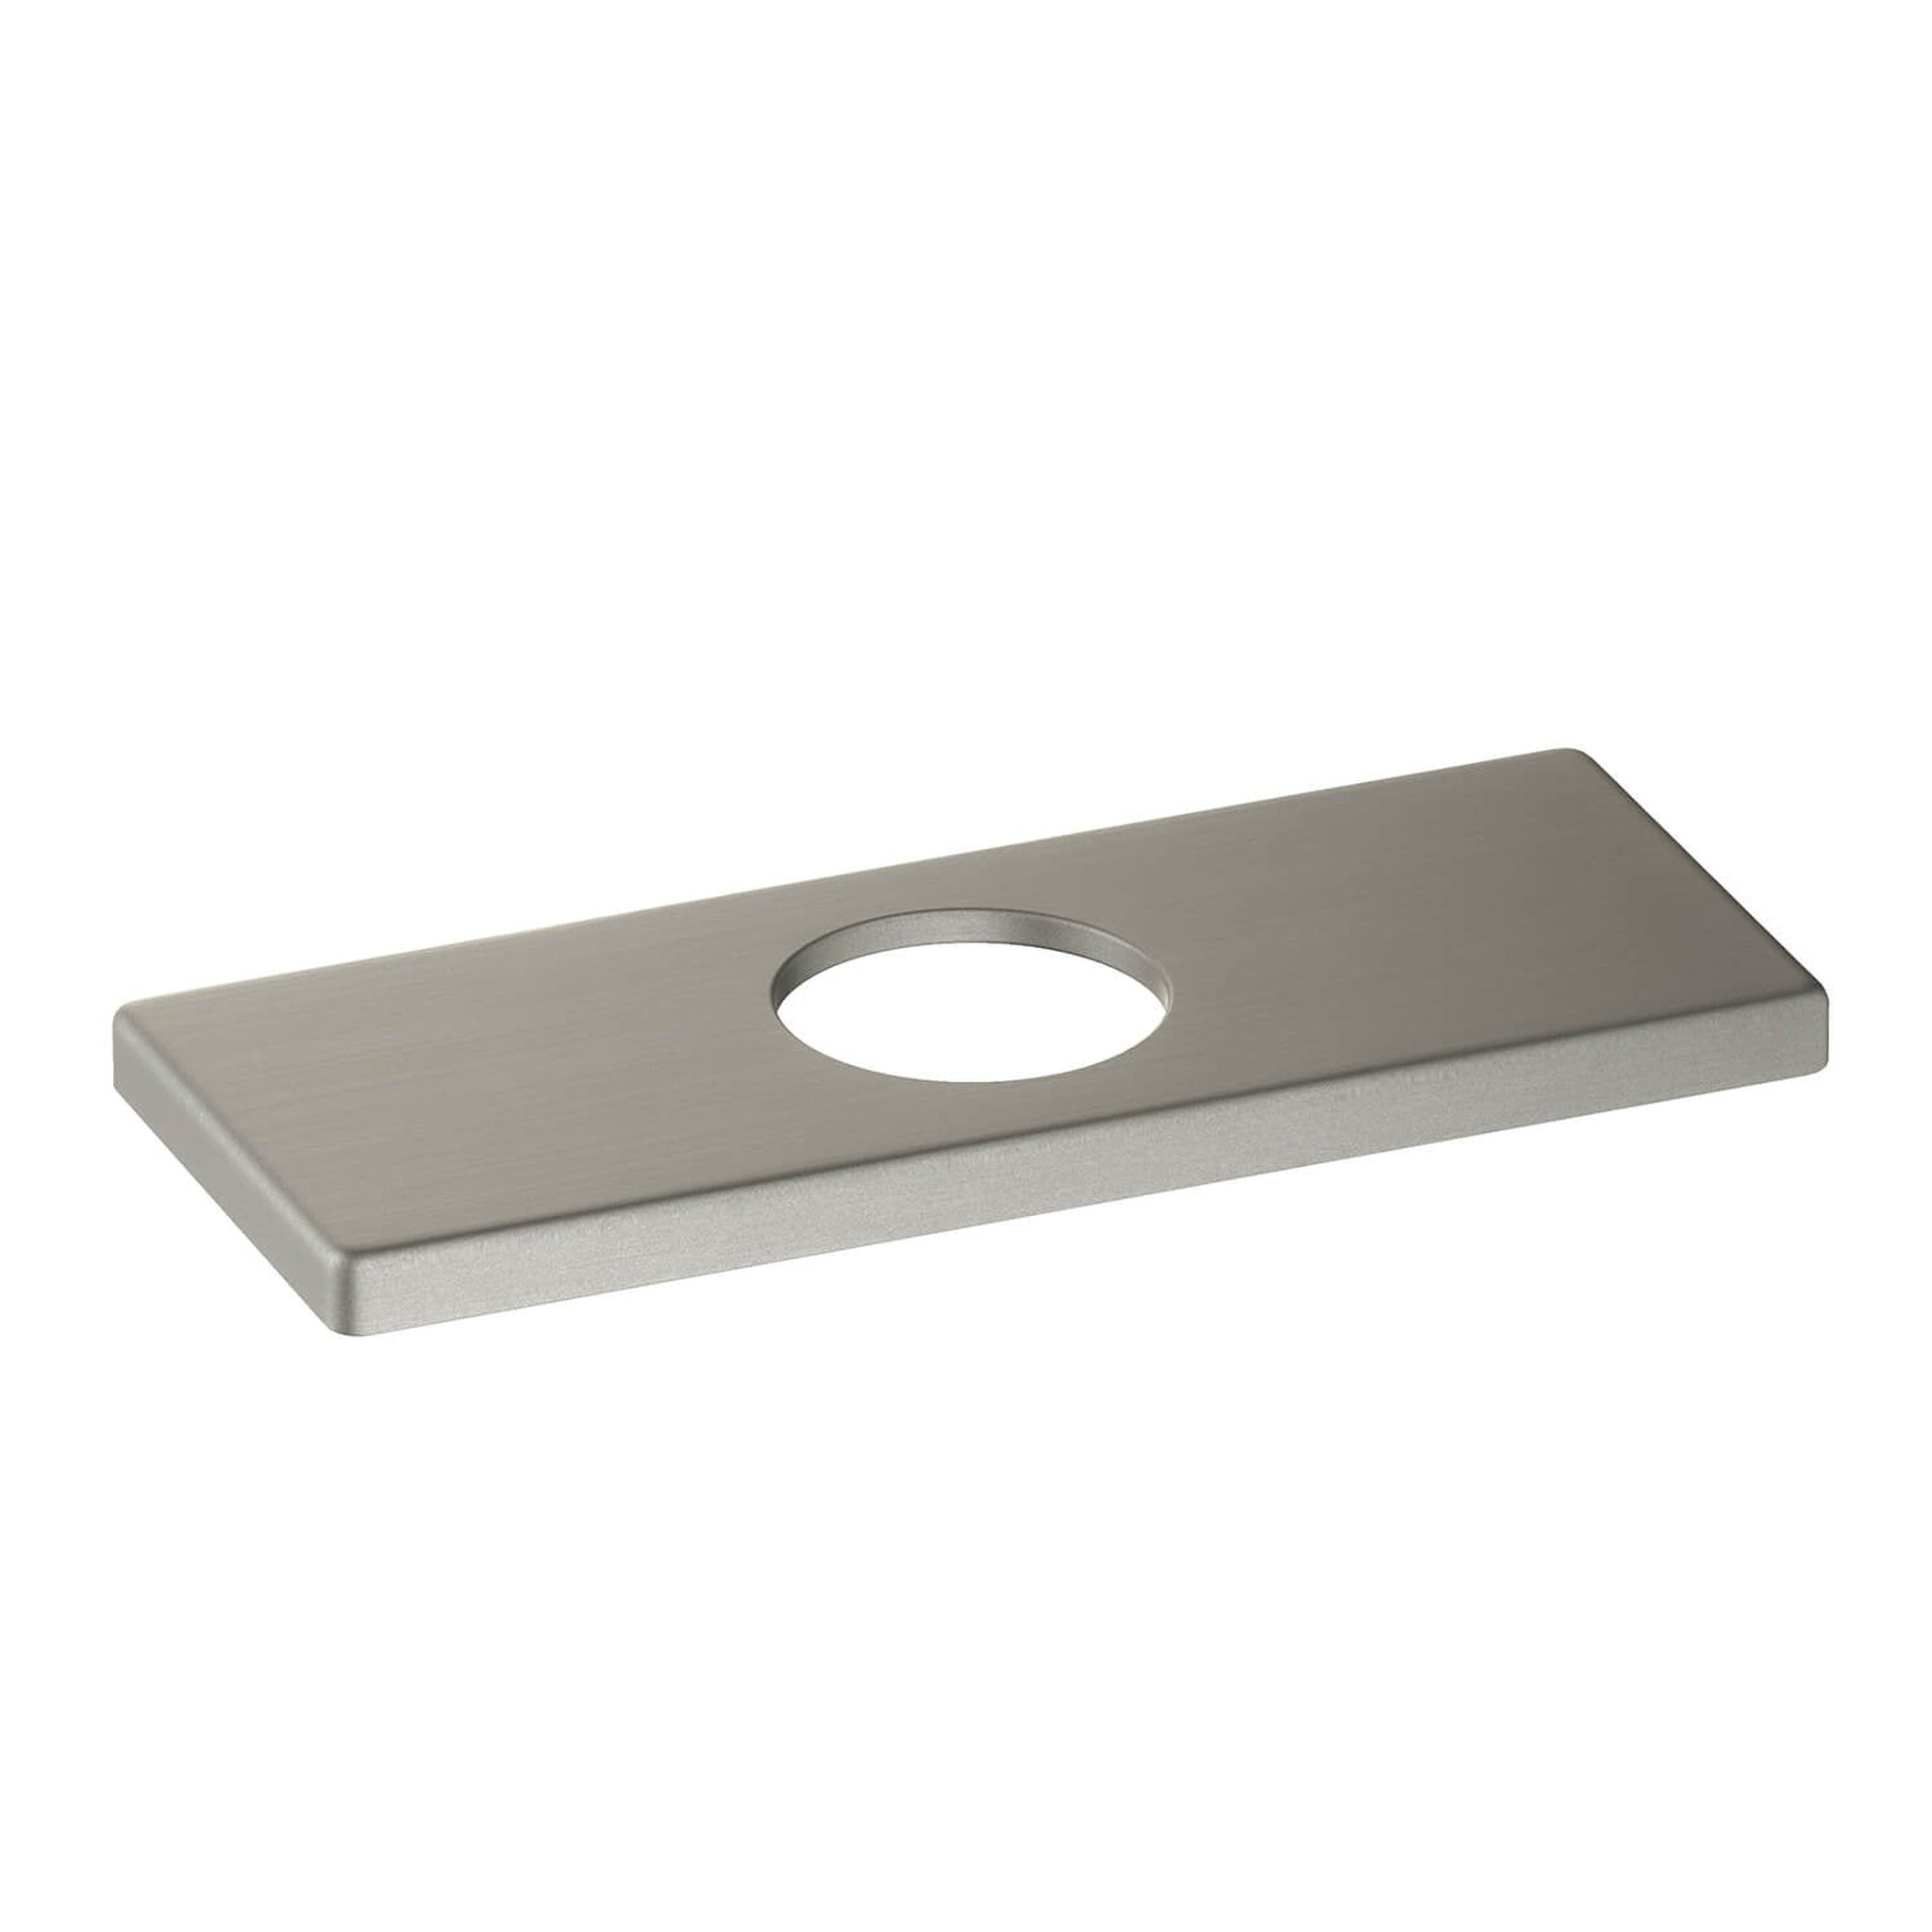 KIBI, KIBI Cubic 6" Stainless Steel Faucet Hole Cover in Brushed Nickel Finish